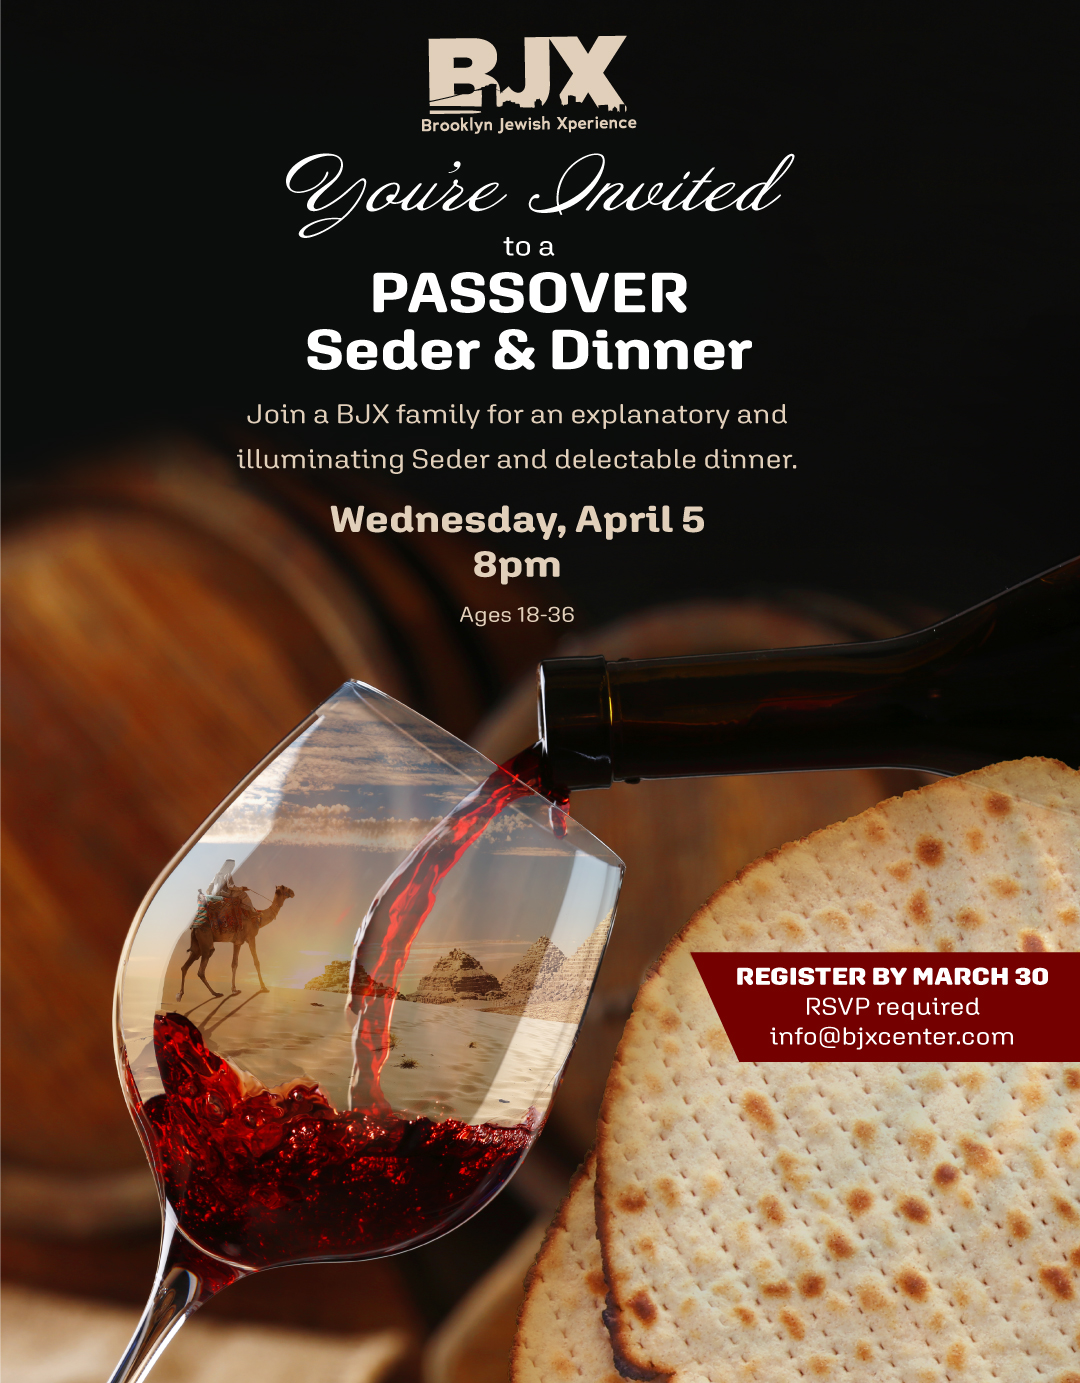 Passover in Brooklyn